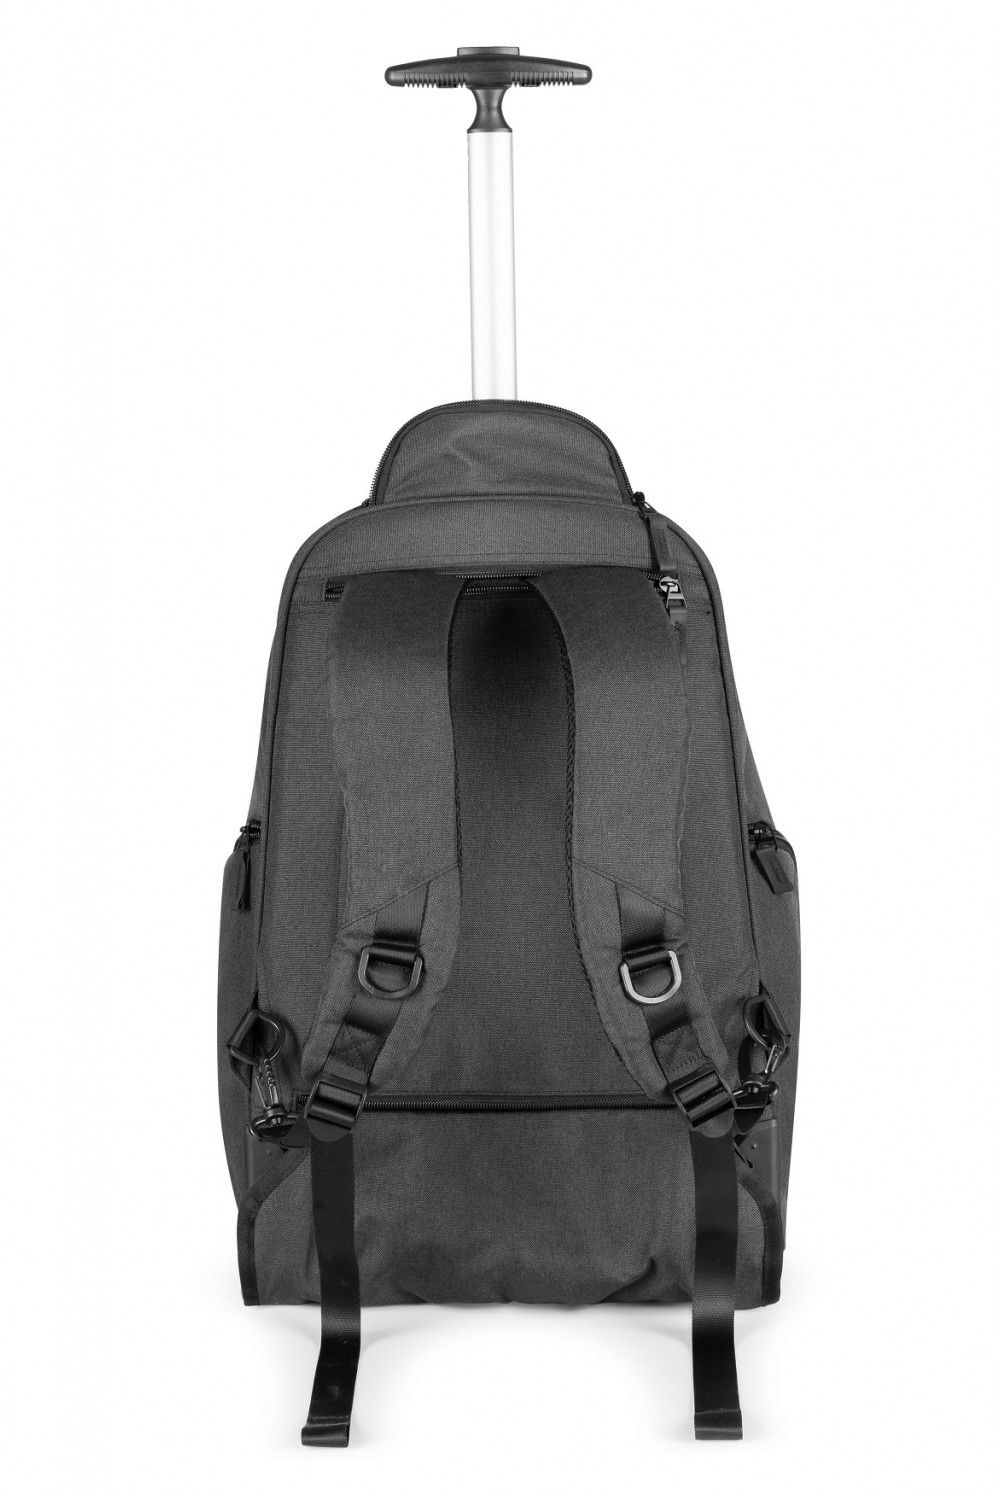 Epic laptop backpack with wheels Dynamik